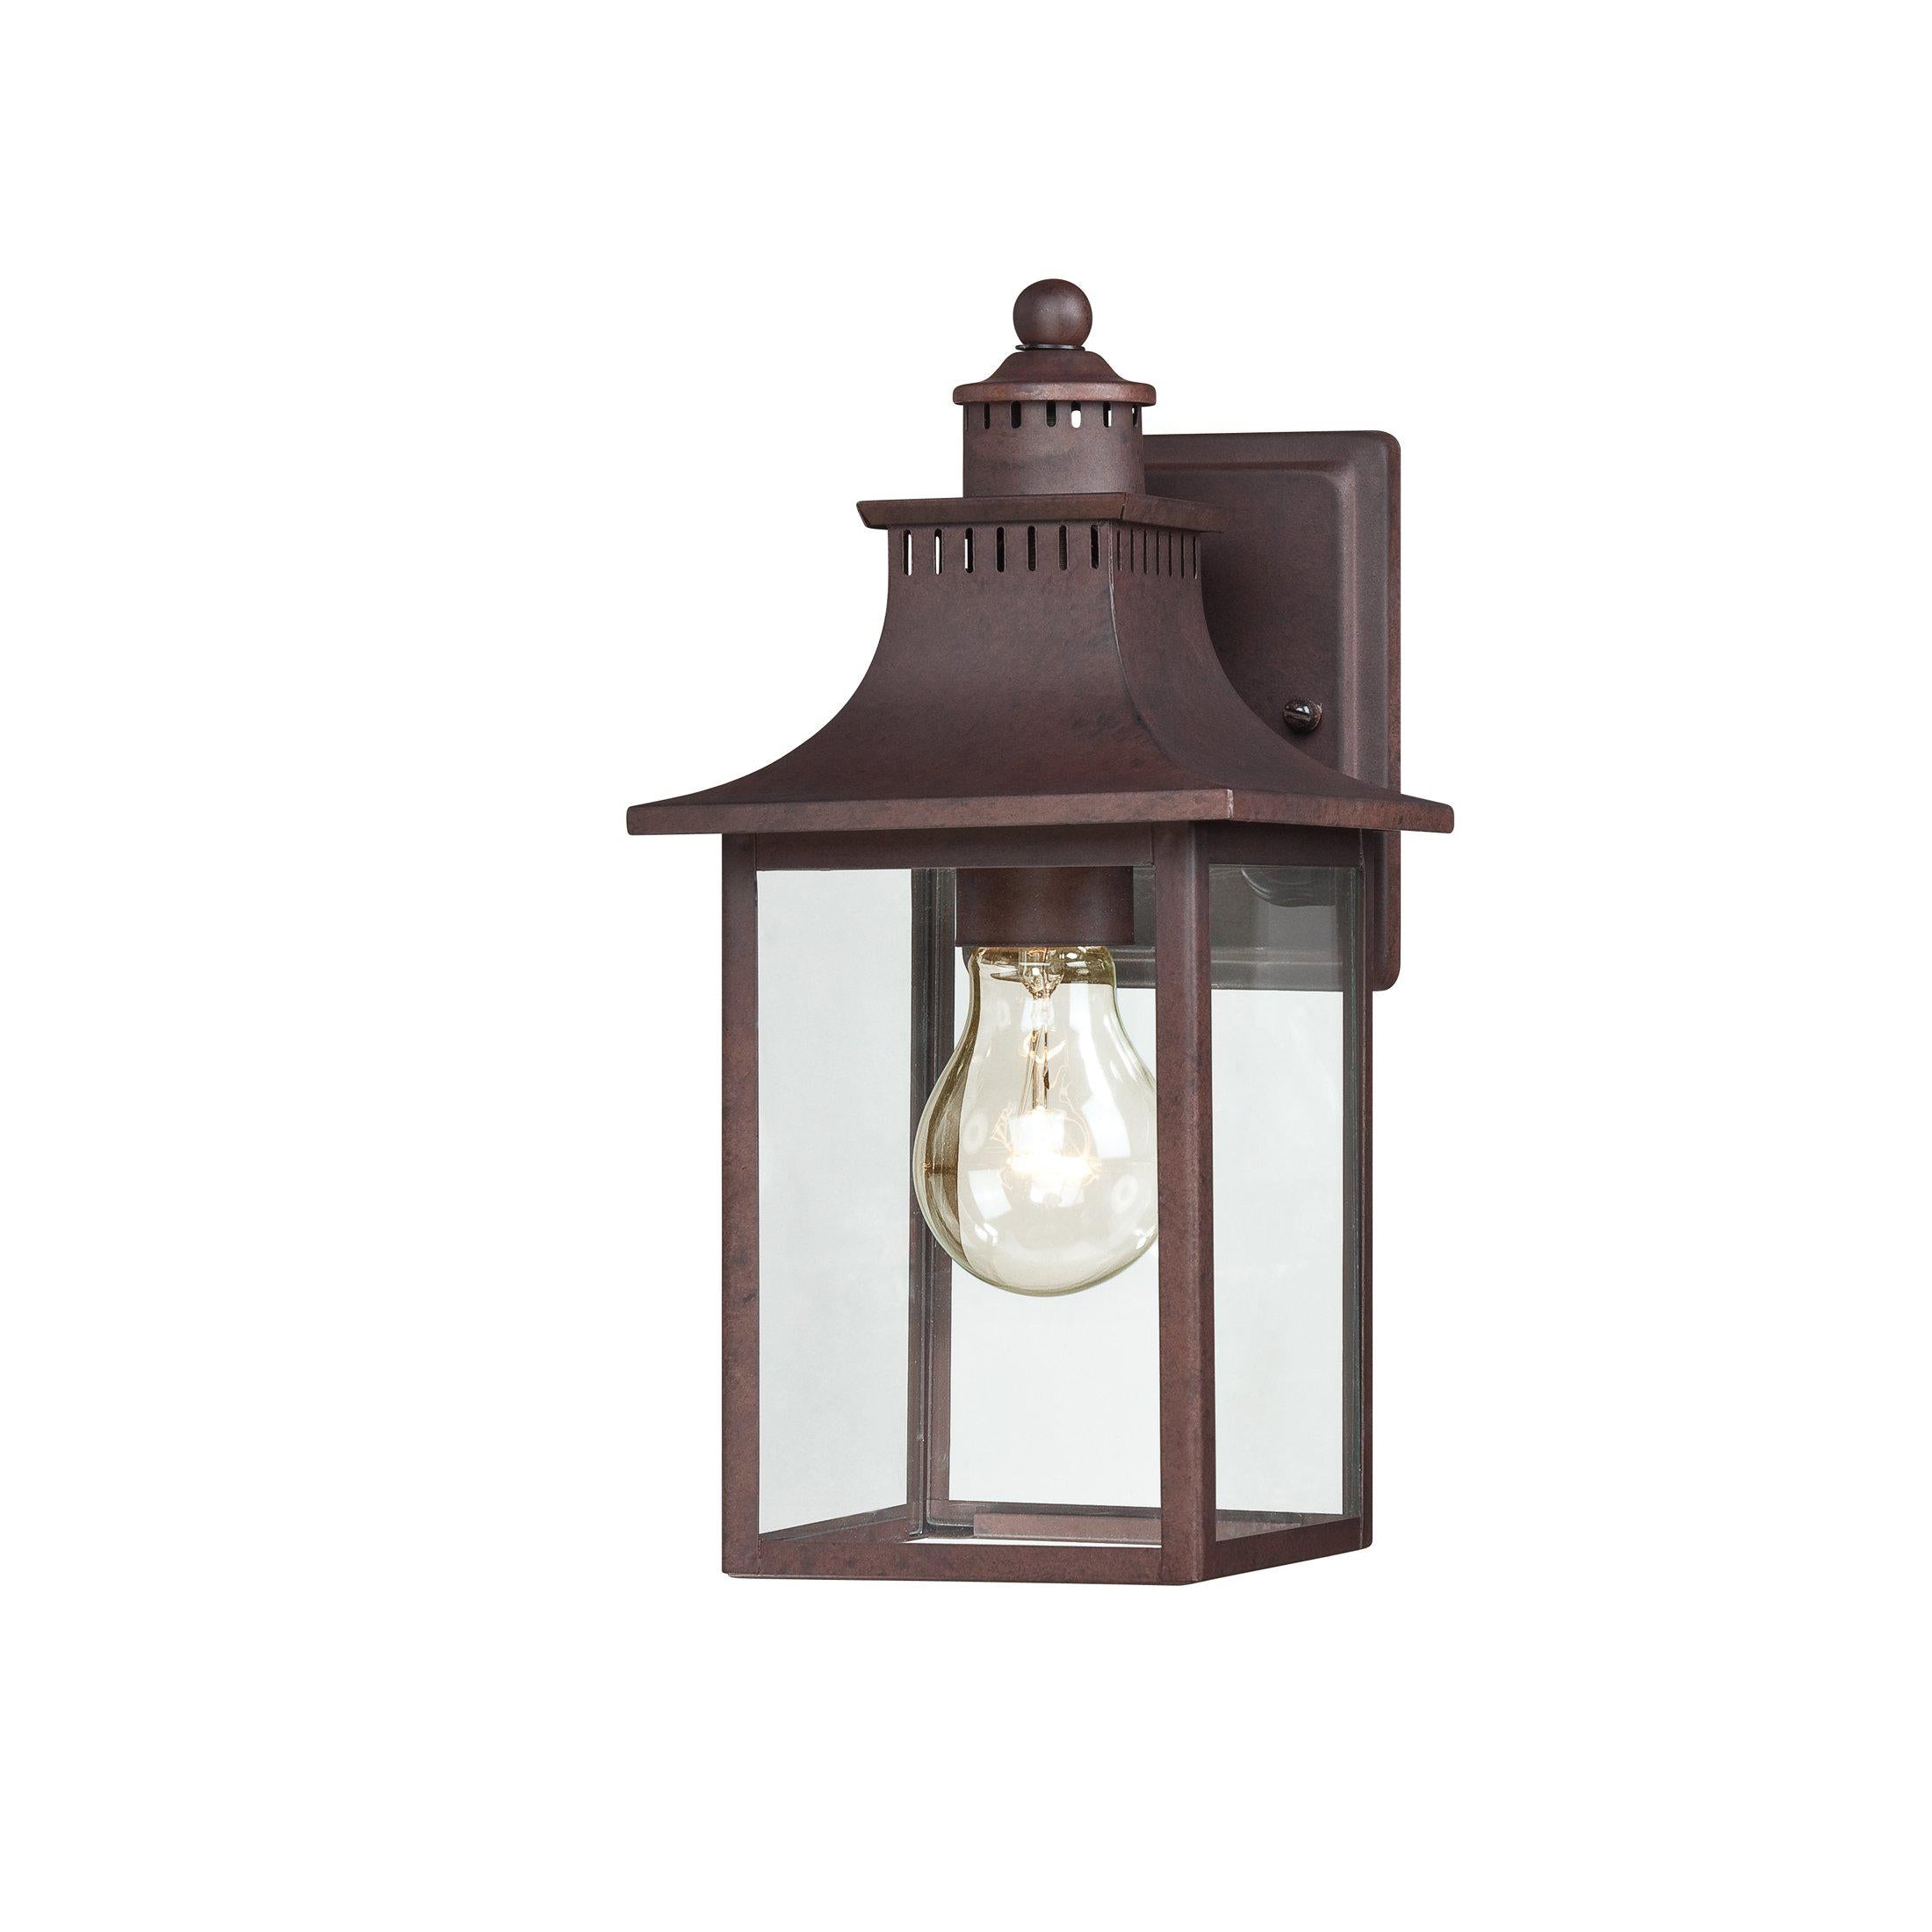 Quoizel  Chancellor Outdoor Lantern, Small Outdoor l Wall Quoizel Copper Bronze  